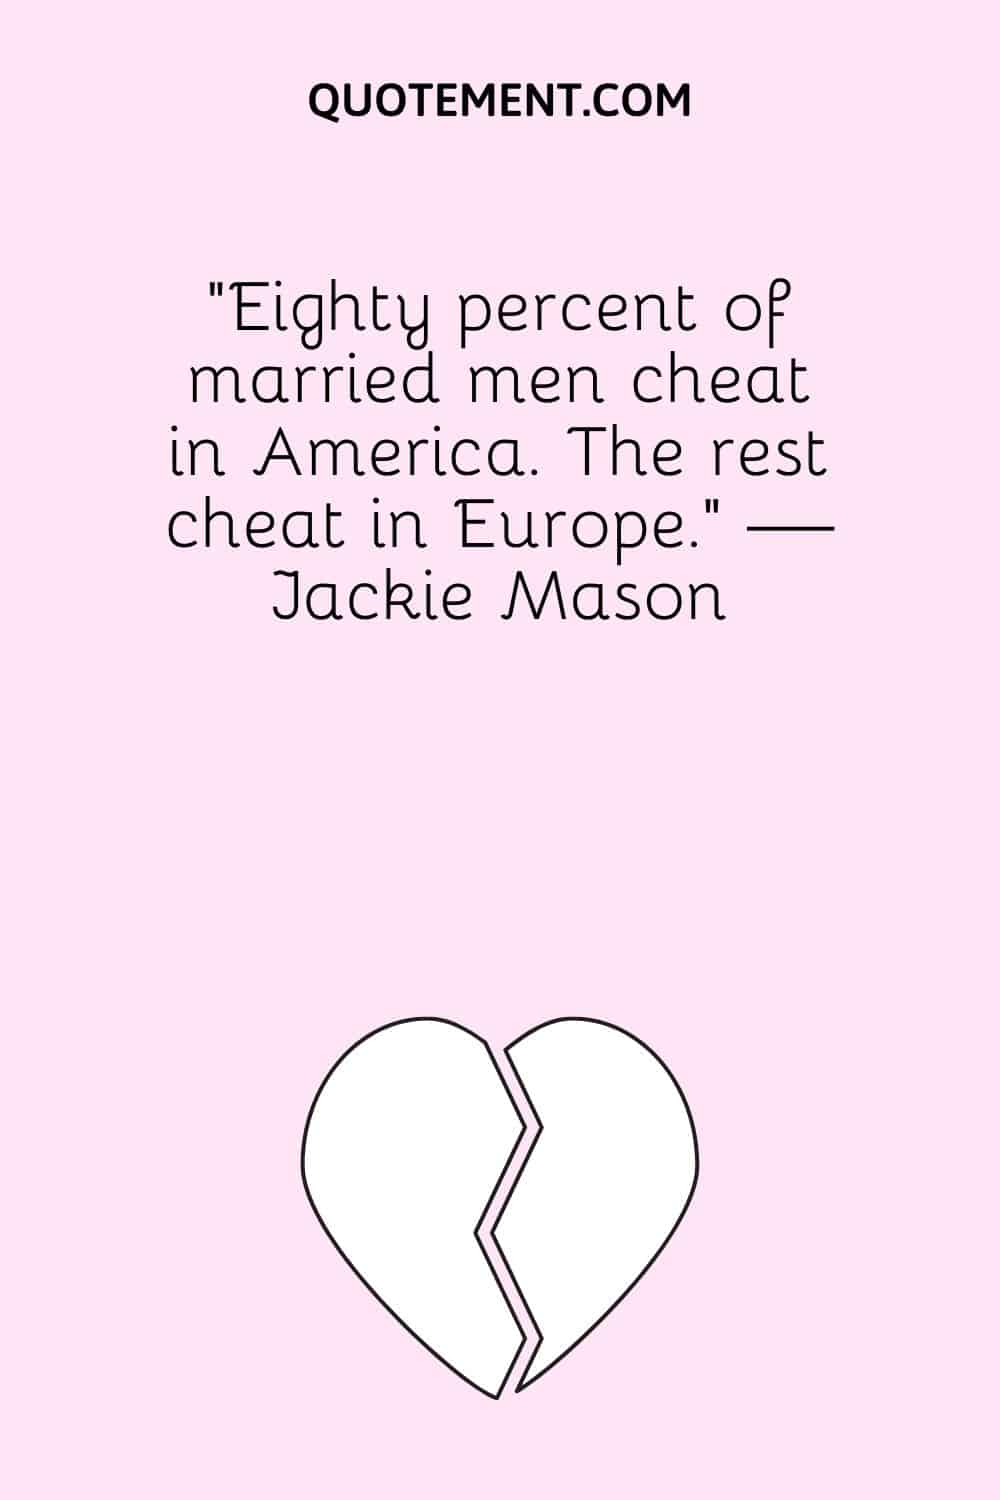 “Eighty percent of married men cheat in America. The rest cheat in Europe.” — Jackie Mason